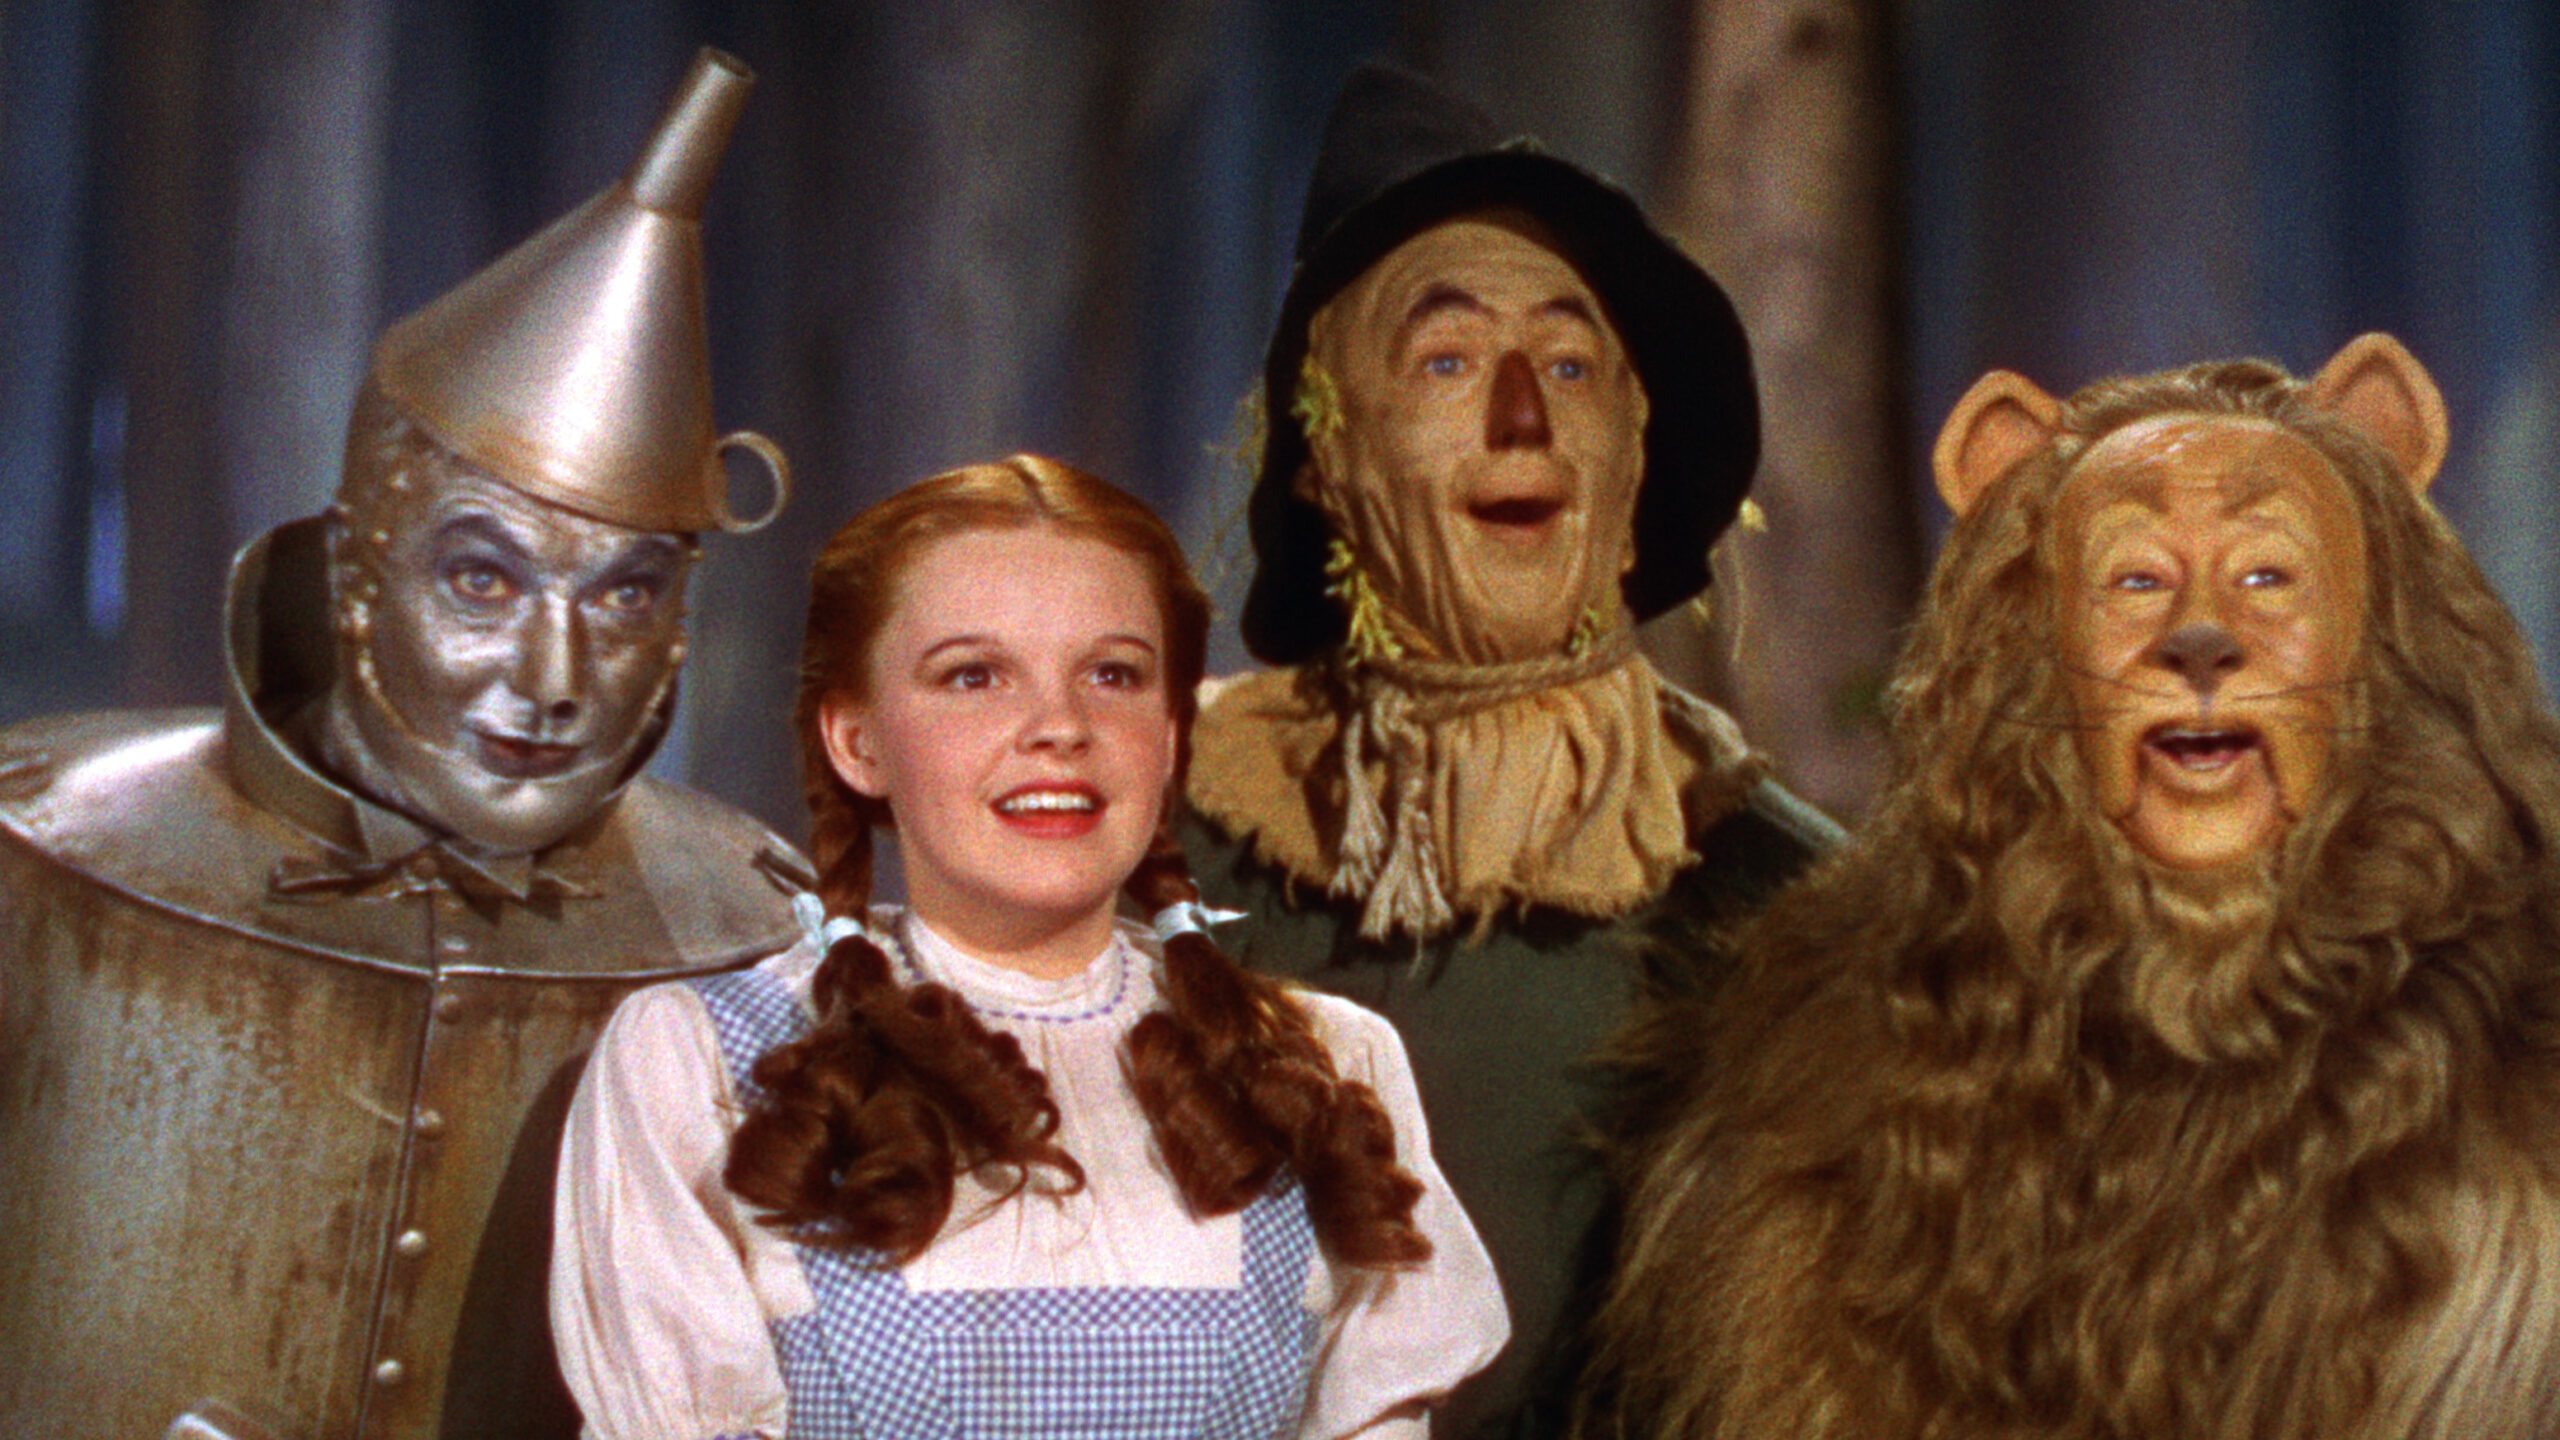 Wizard of Oz' remake planned with 'Watchmen' director